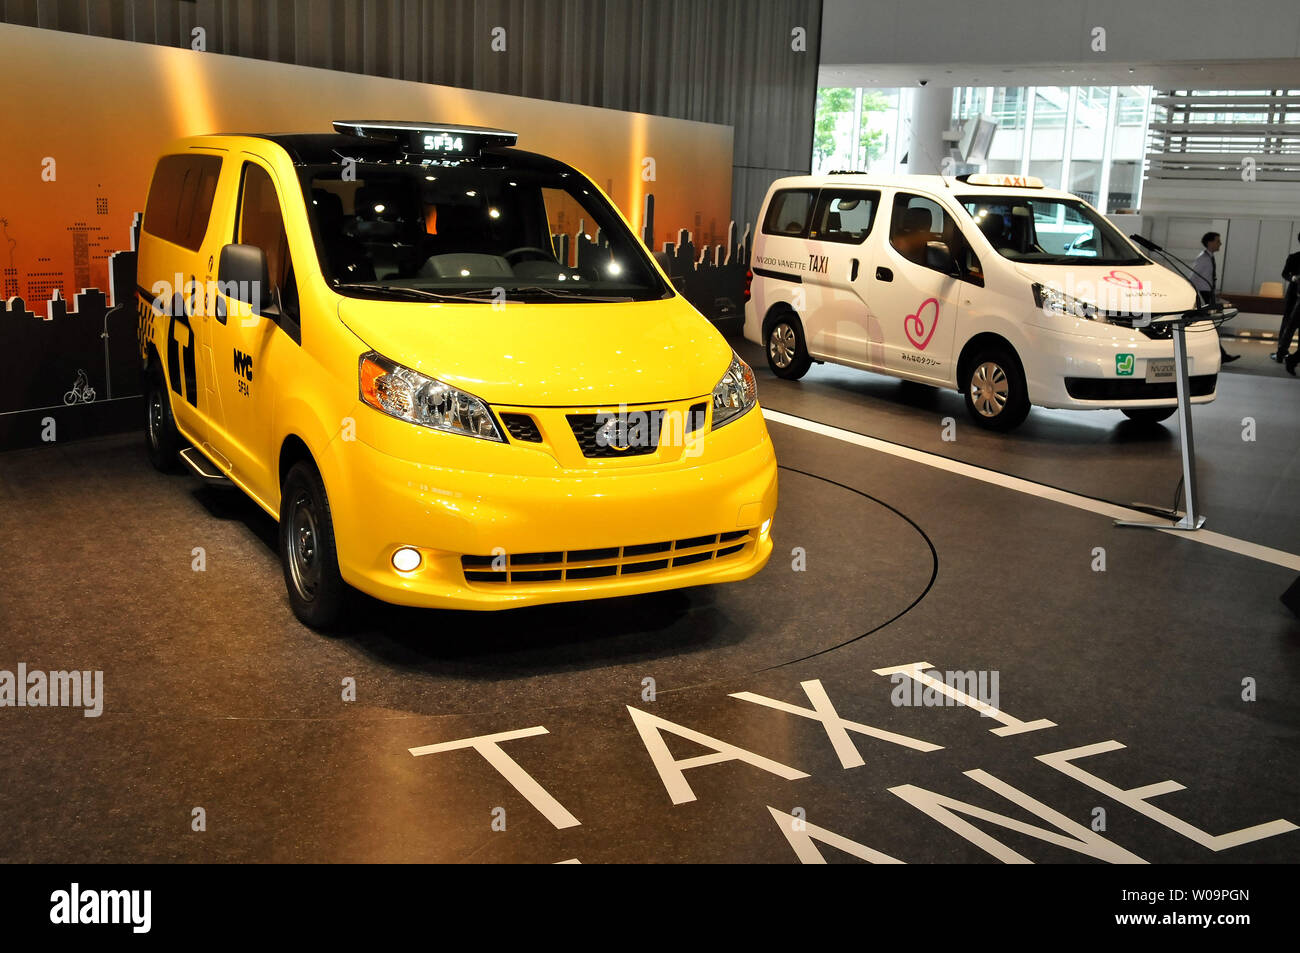 New York's taxi "NV200" is displayed during the press conference at  Nissan's global headquarters in Yokohama, Kanagawa prefecture, Japan, on  May 29, 2012. The NV200 was chosen by the New York City